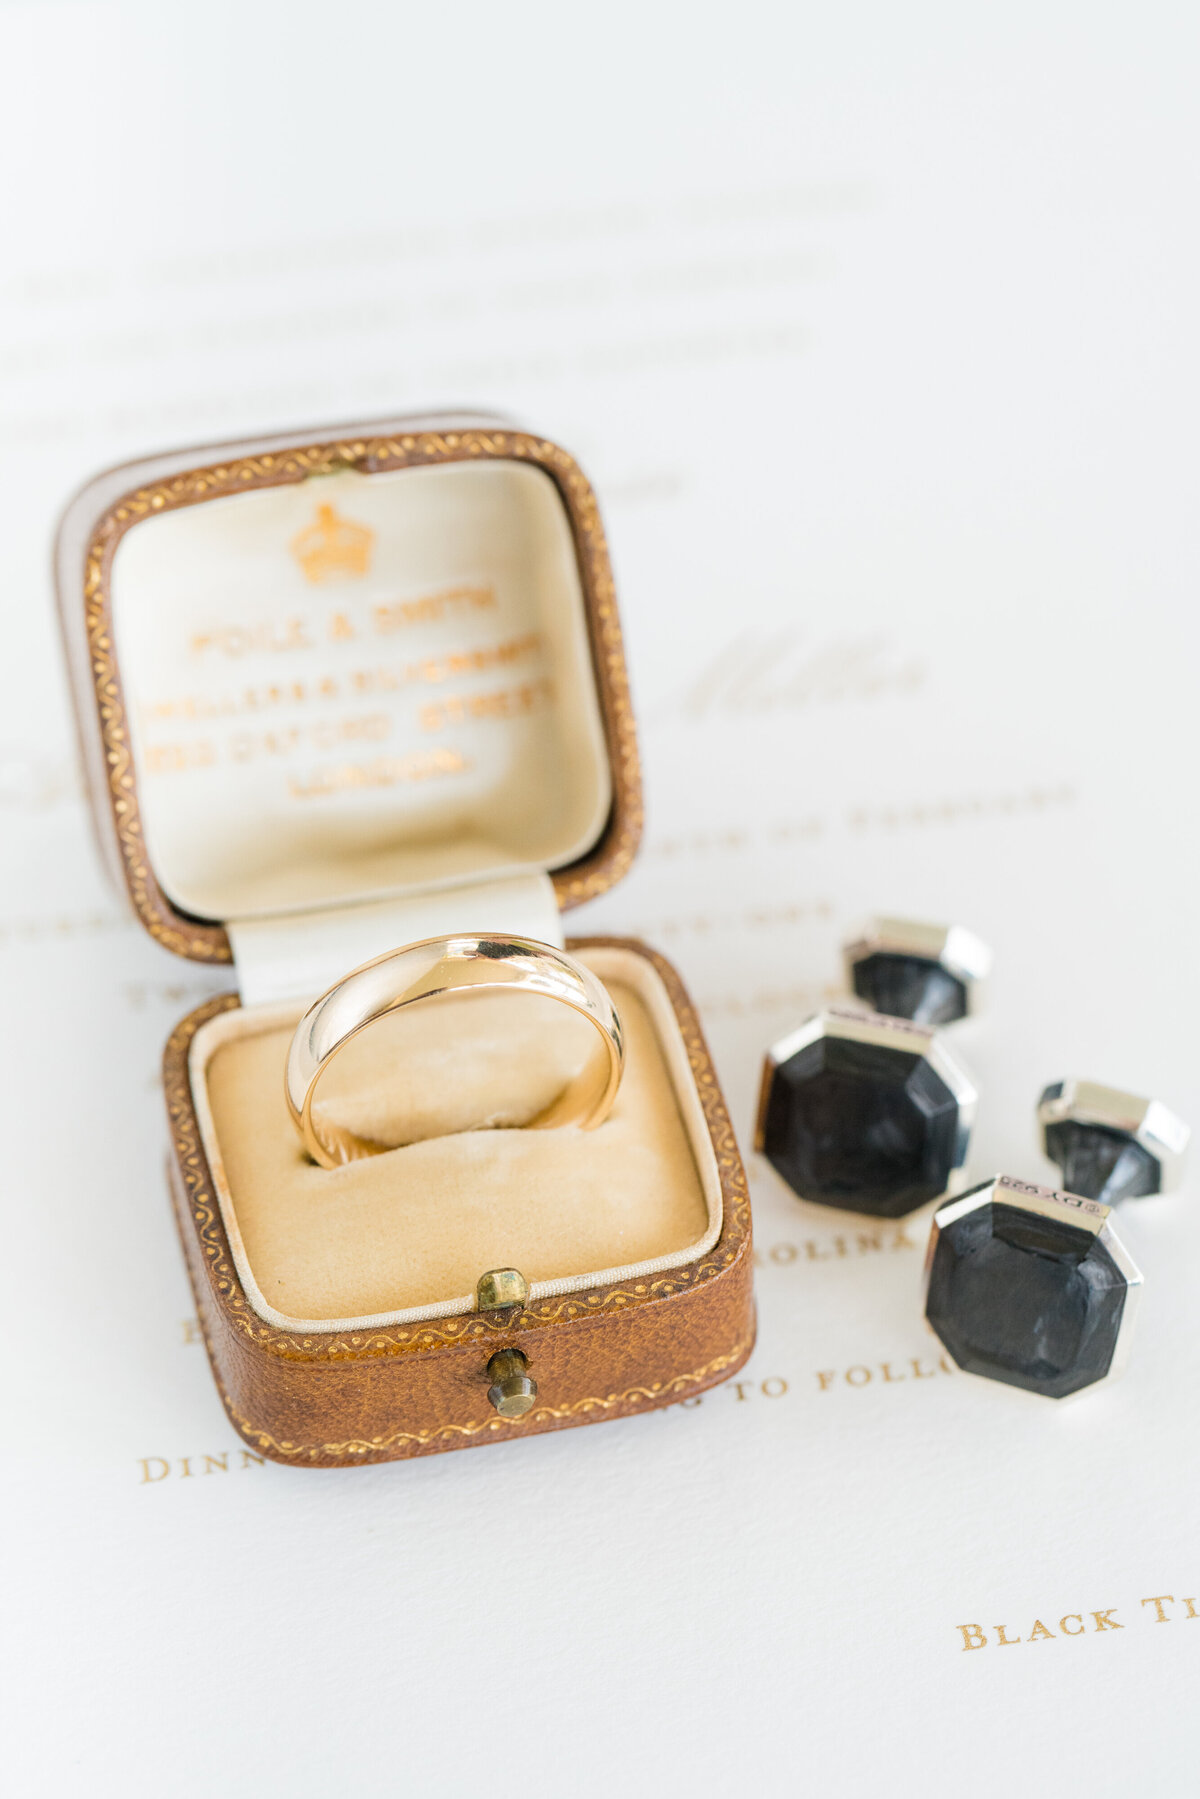 Groom's wedding ring styled on invitation suite photographed by Charleston wedding photographer Dana Cubbage.